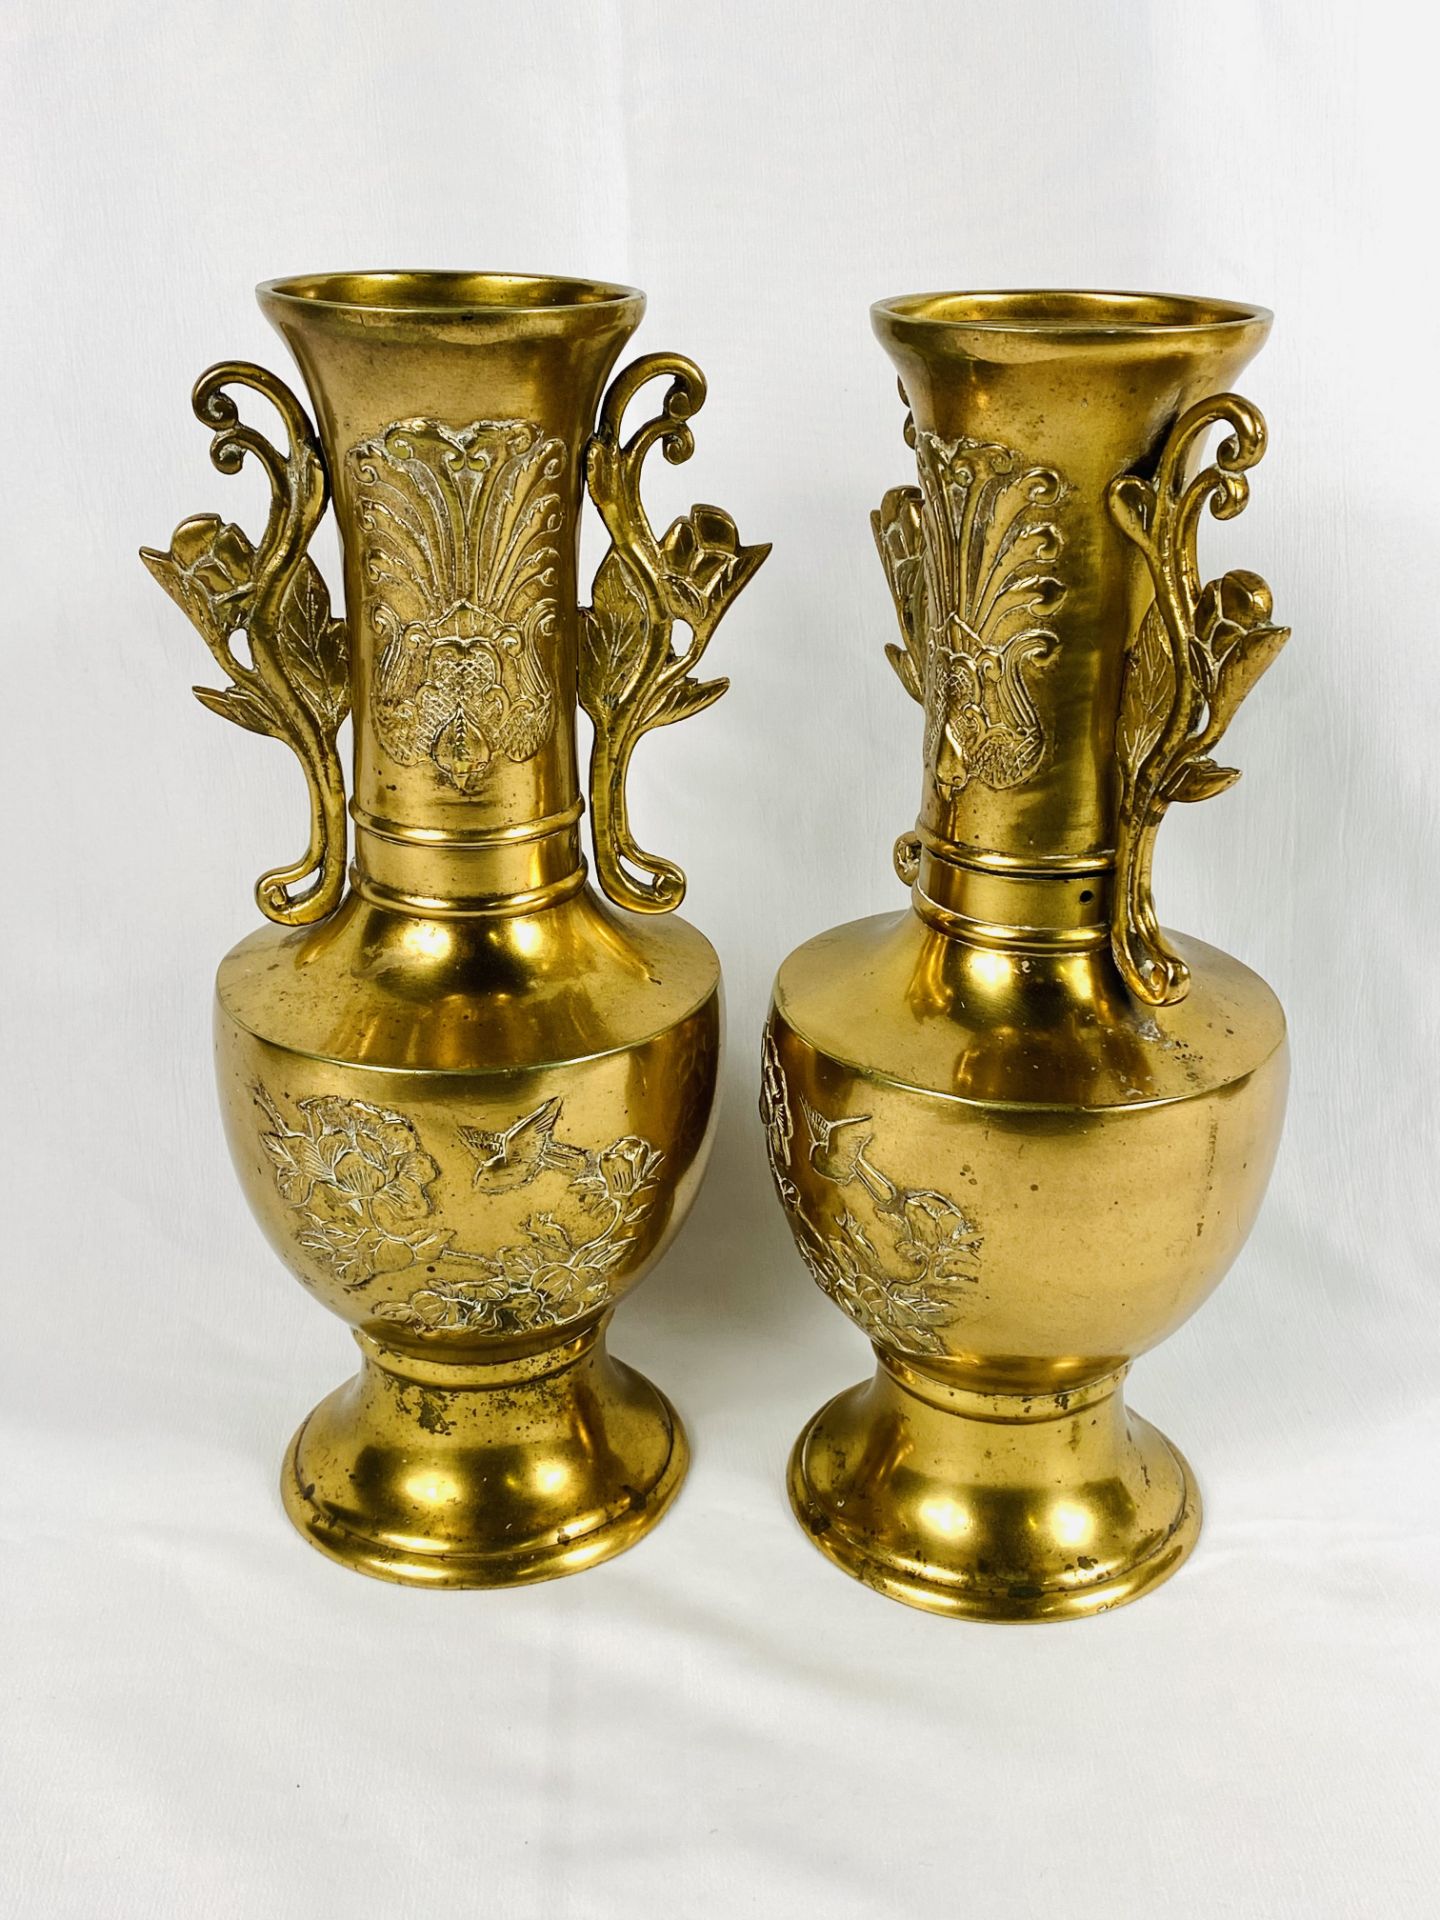 Pair of Meiji style brass vases - Image 2 of 3